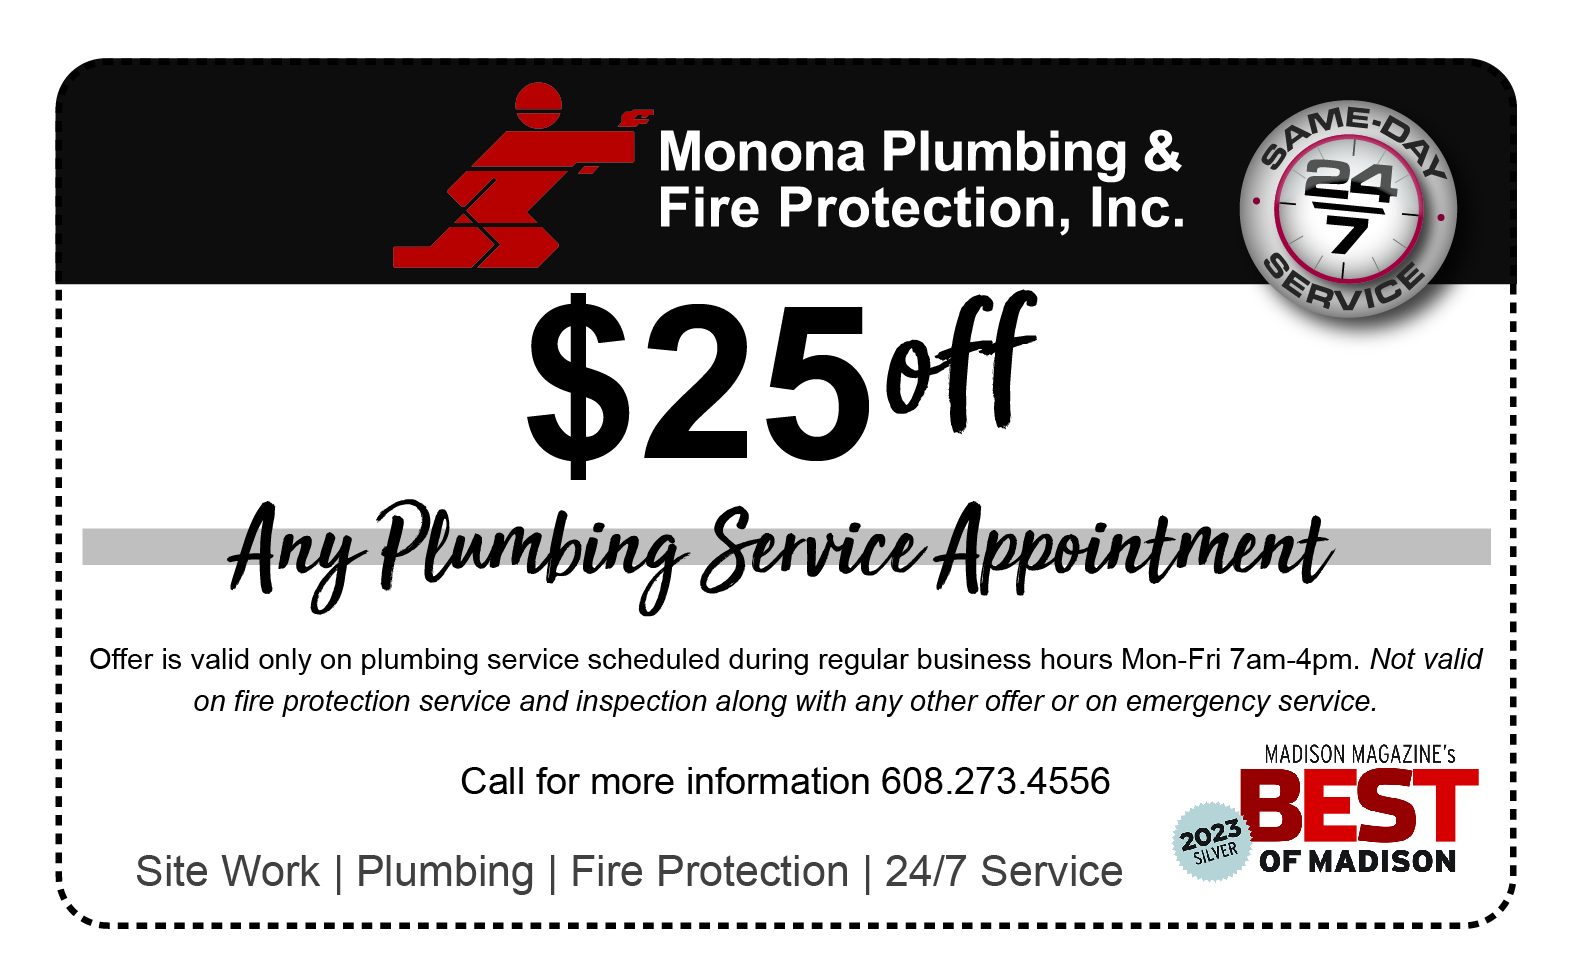 Monona Plumbing & Fire Protection Special Offers